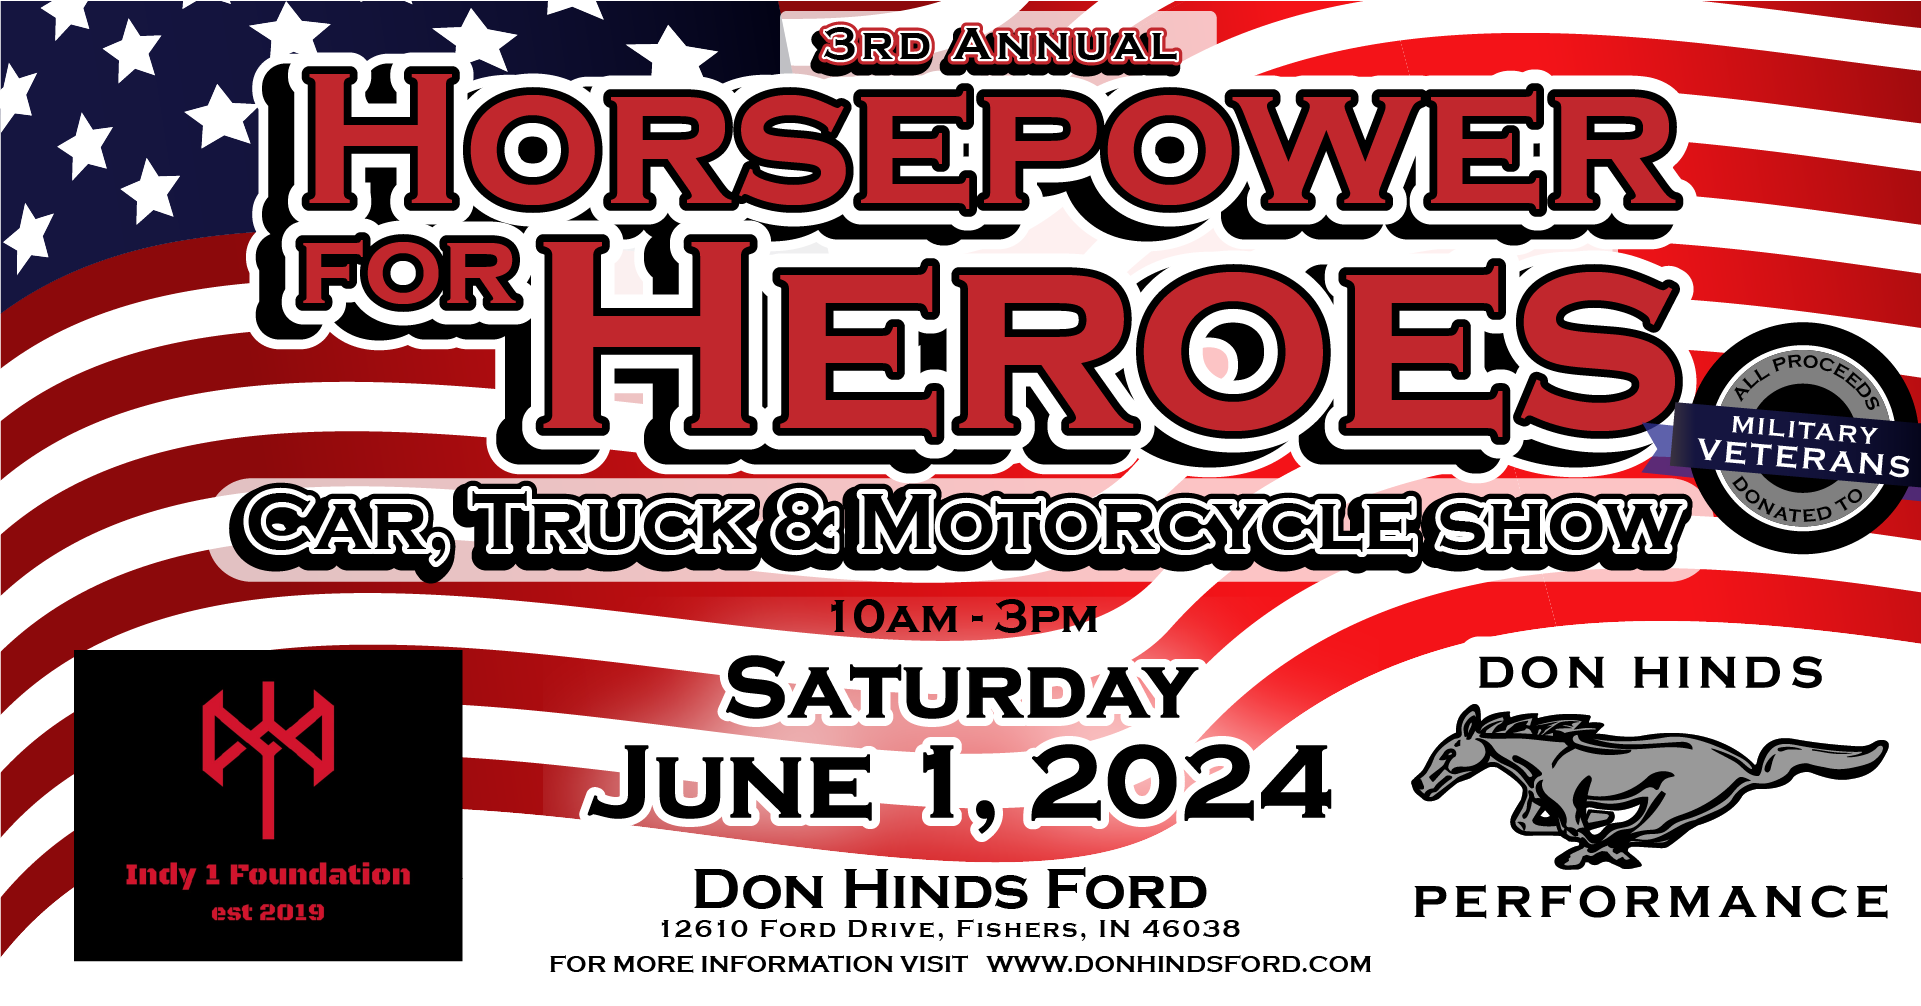 Horsepower for Heroes Red White and Blue Event banner